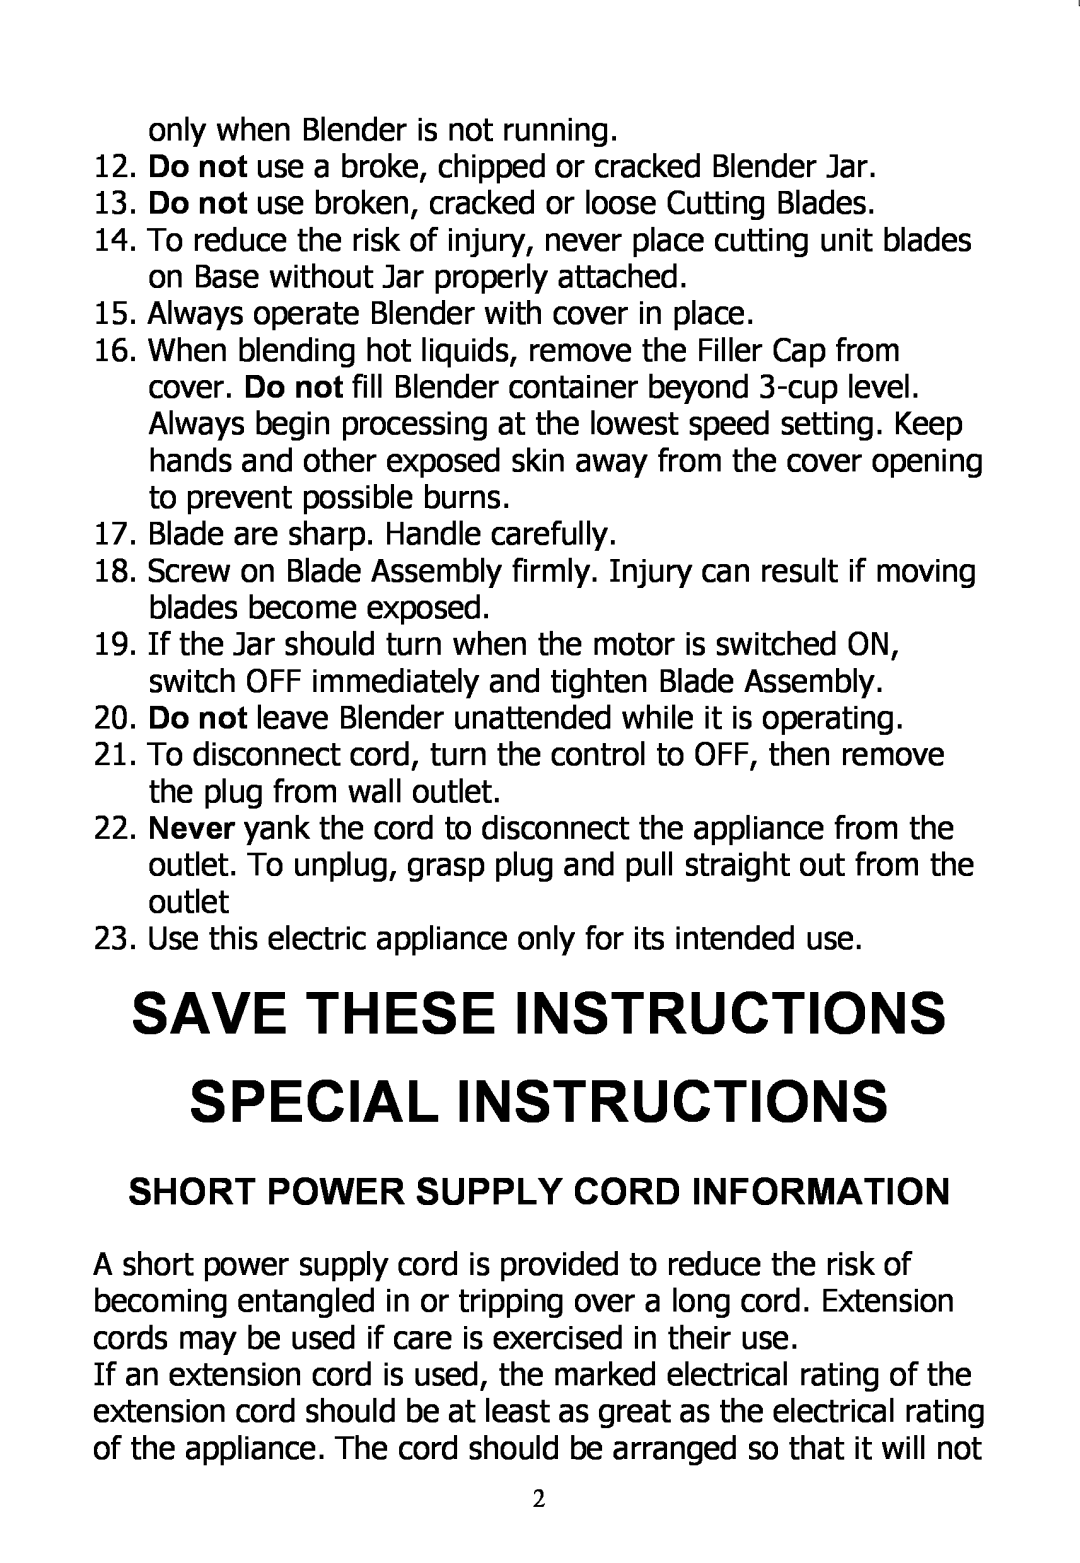 Rival DC-TB170 instruction manual Short Power Supply Cord Information, Save These Instructions Special Instructions 